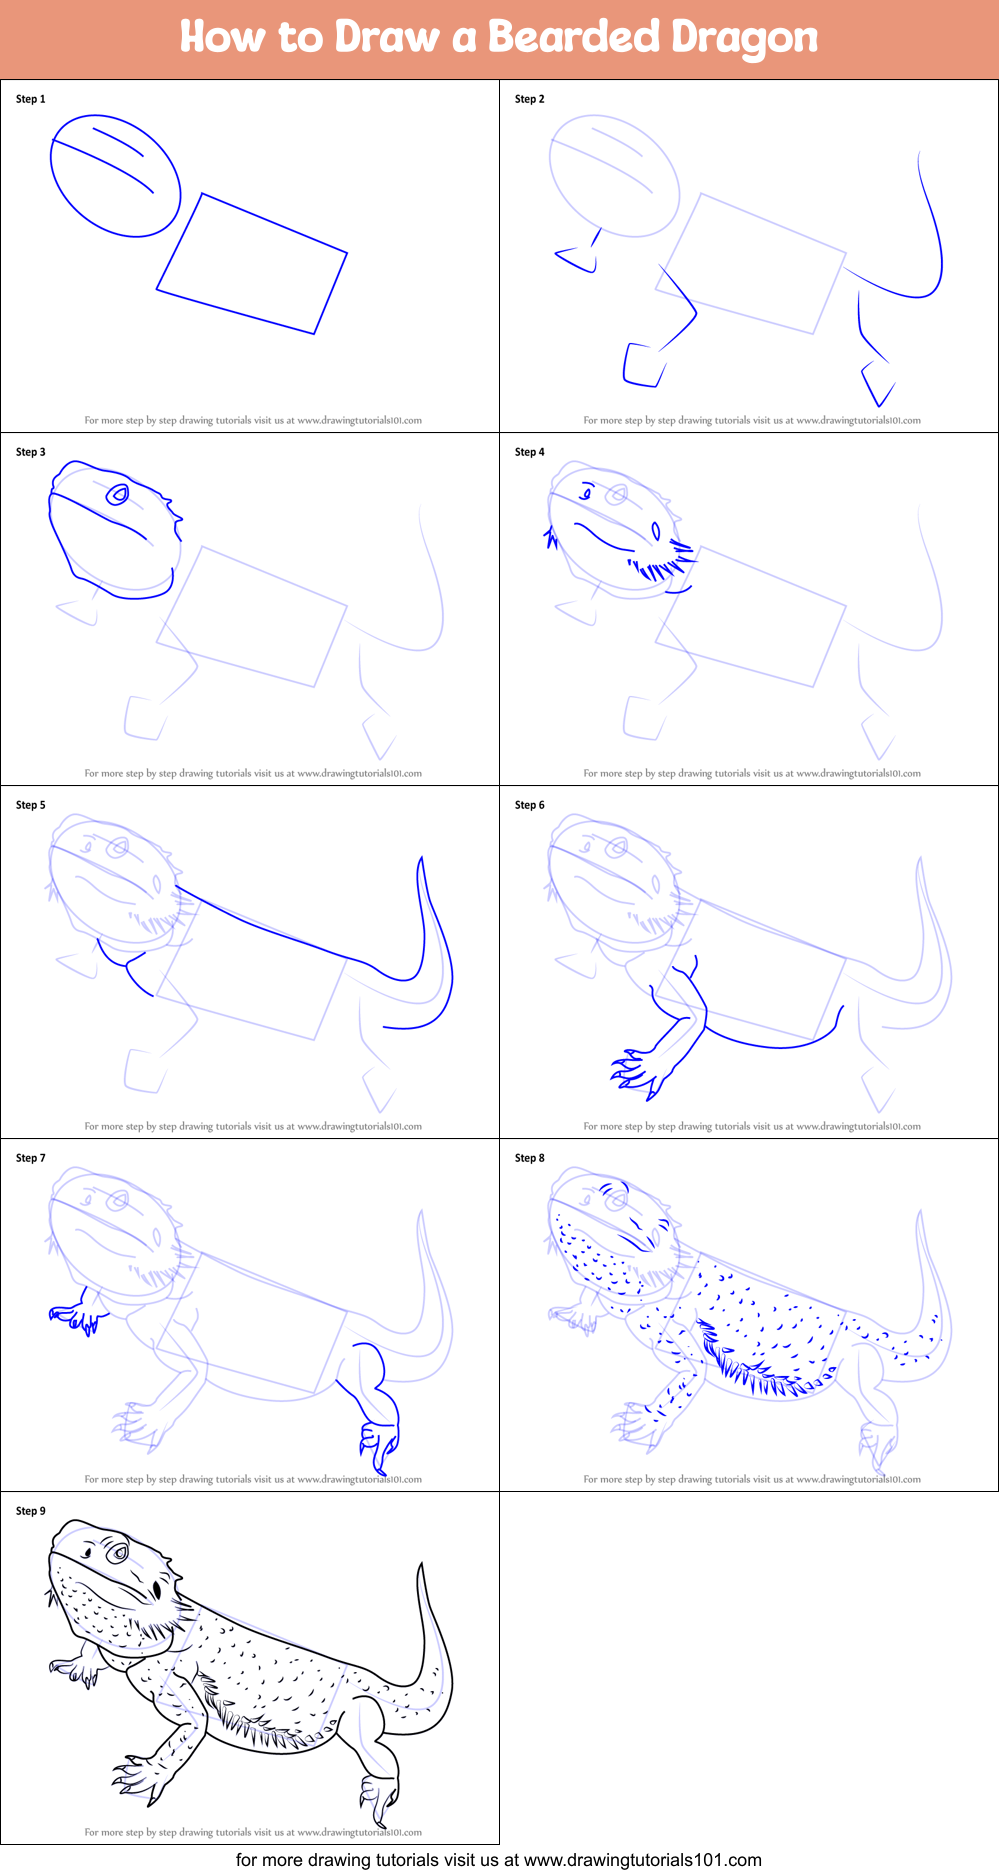 How to Draw a Bearded Dragon printable step by step drawing sheet